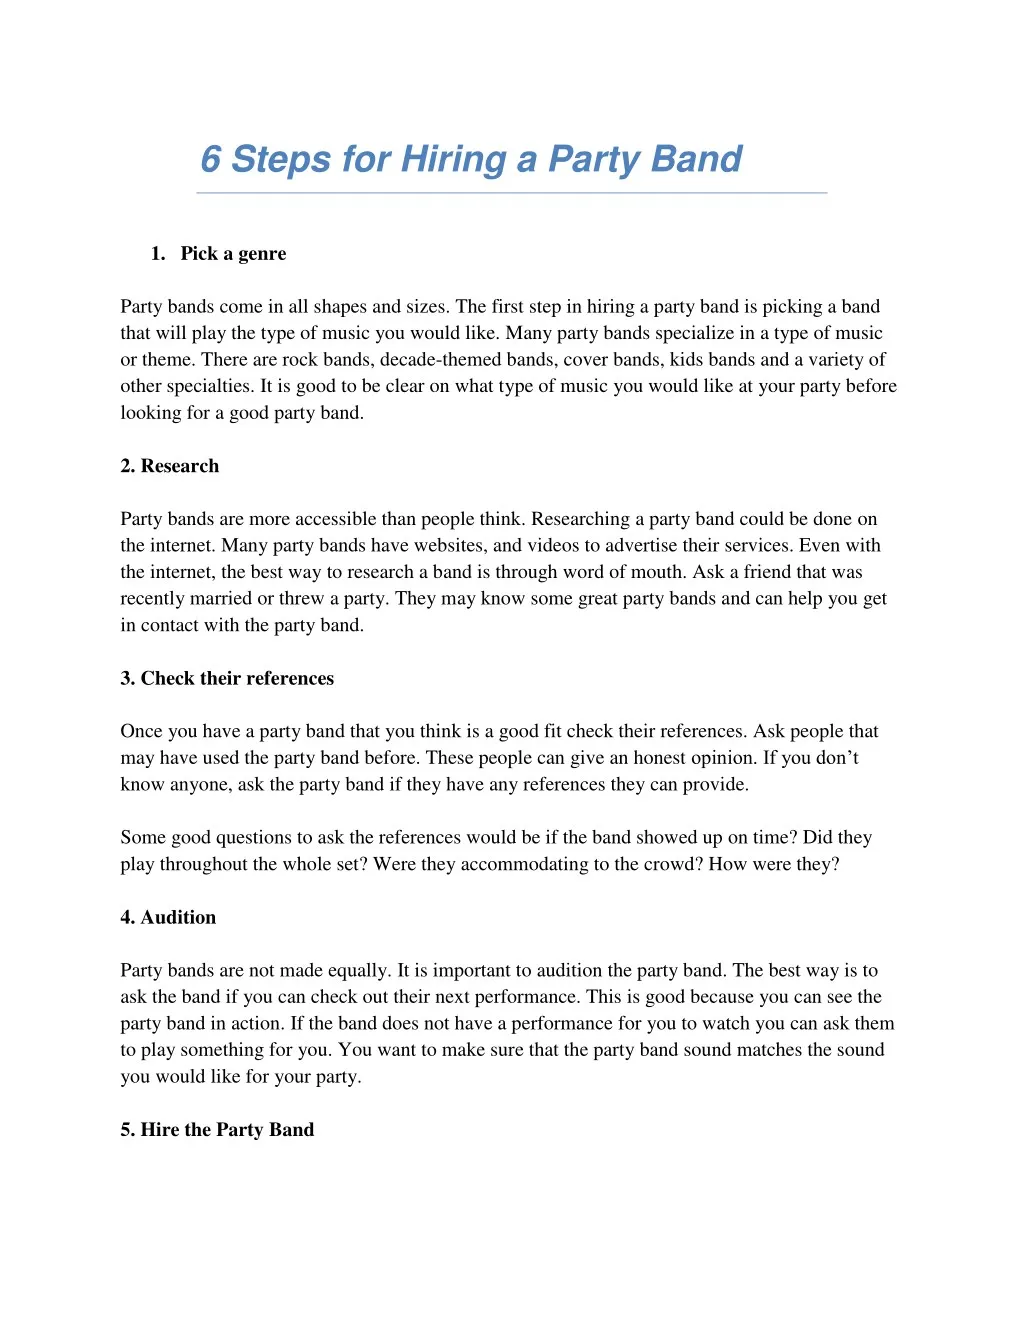 6 steps for hiring a party band